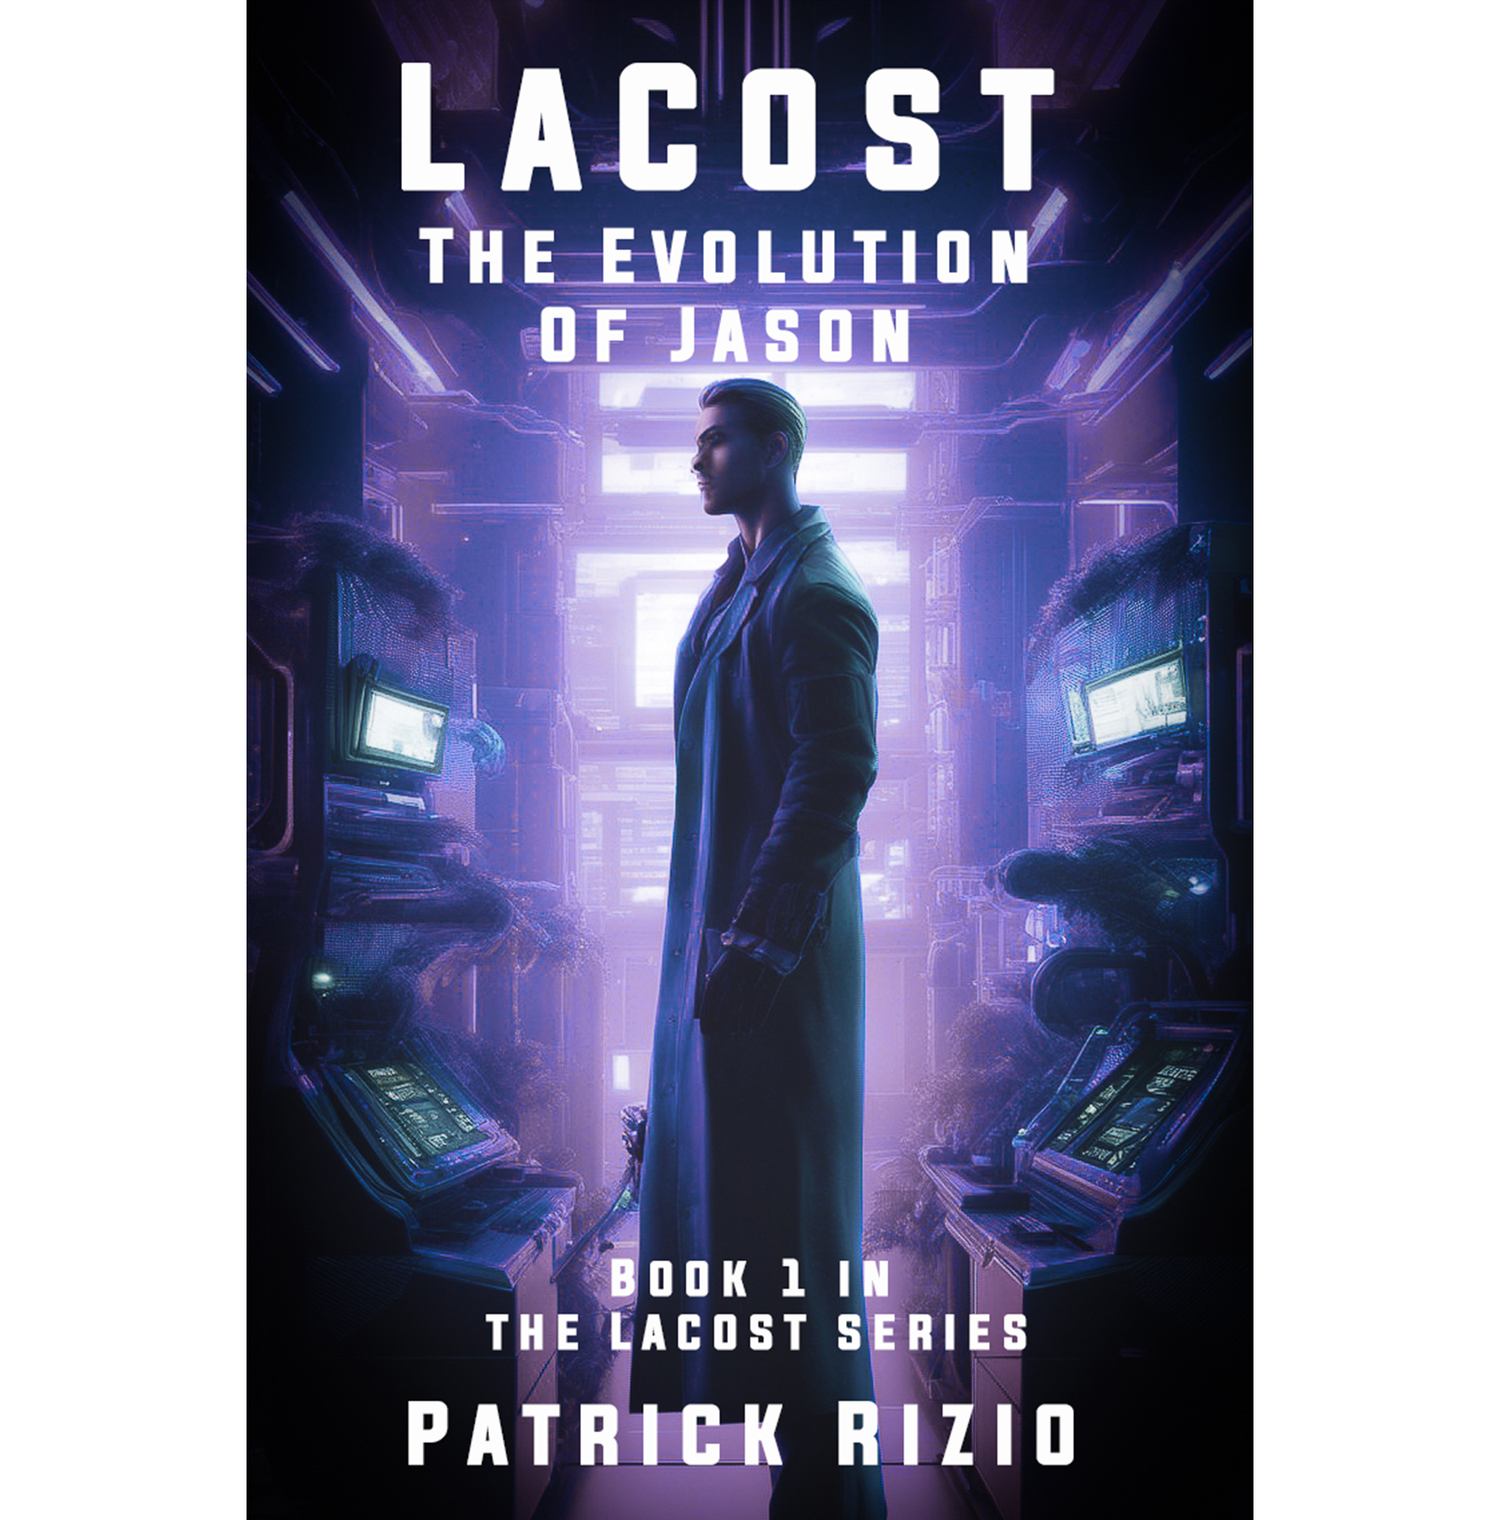 The LaCost Series: Sci-Fi, Romance, and Adventure